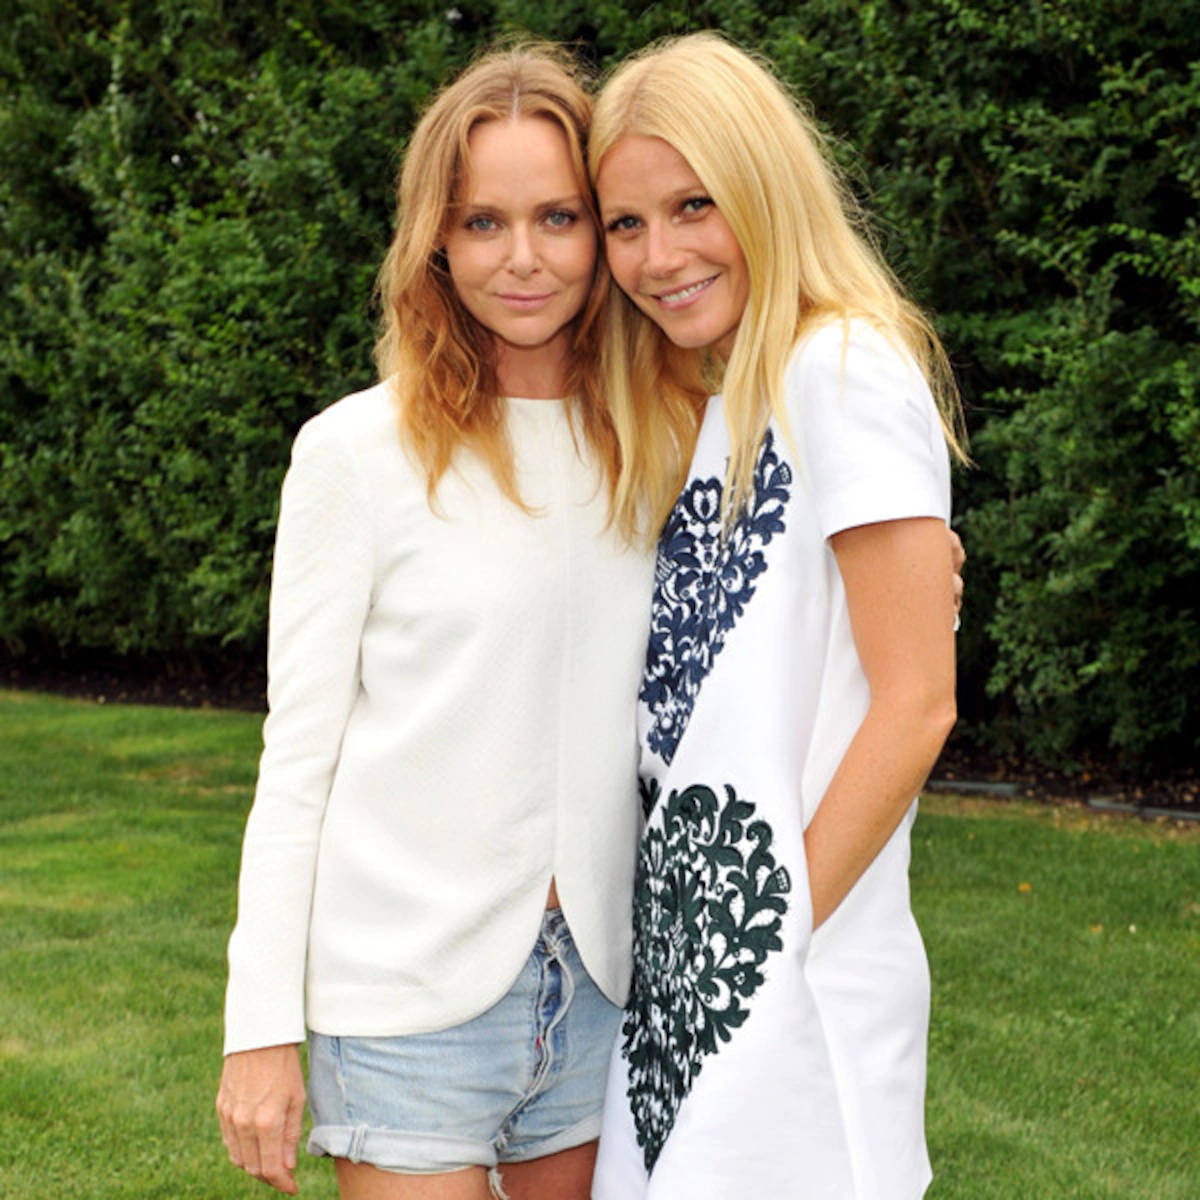 Stellamccartney Med Gwyneth Paltrow. (note: This Is The Direct Translation Of The Sentence And Does Not Necessarily Reflect A Specific Context Related To Computer Or Mobile Wallpaper. Please Provide More Guidance/context For A More Accurate Translation). Wallpaper